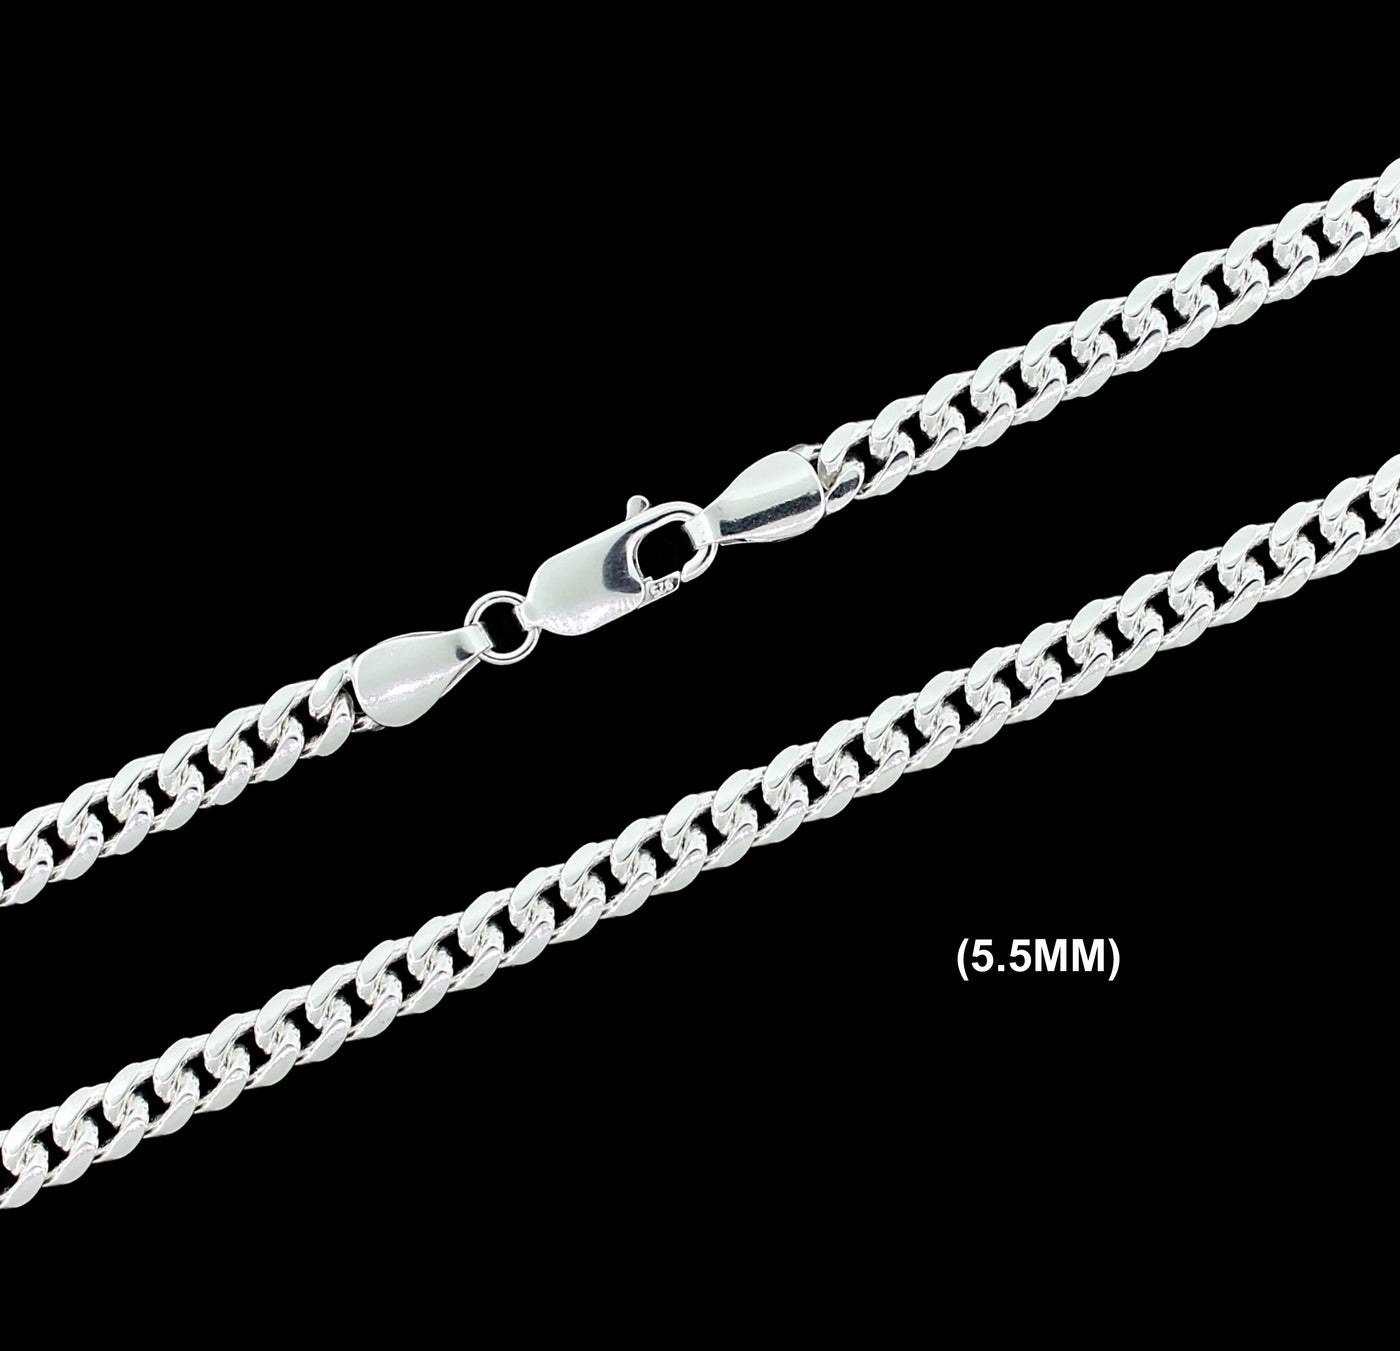 5.5MM Solid 925 Sterling Silver Miami Cuban Link Chain Necklace or Bracelet ITALY